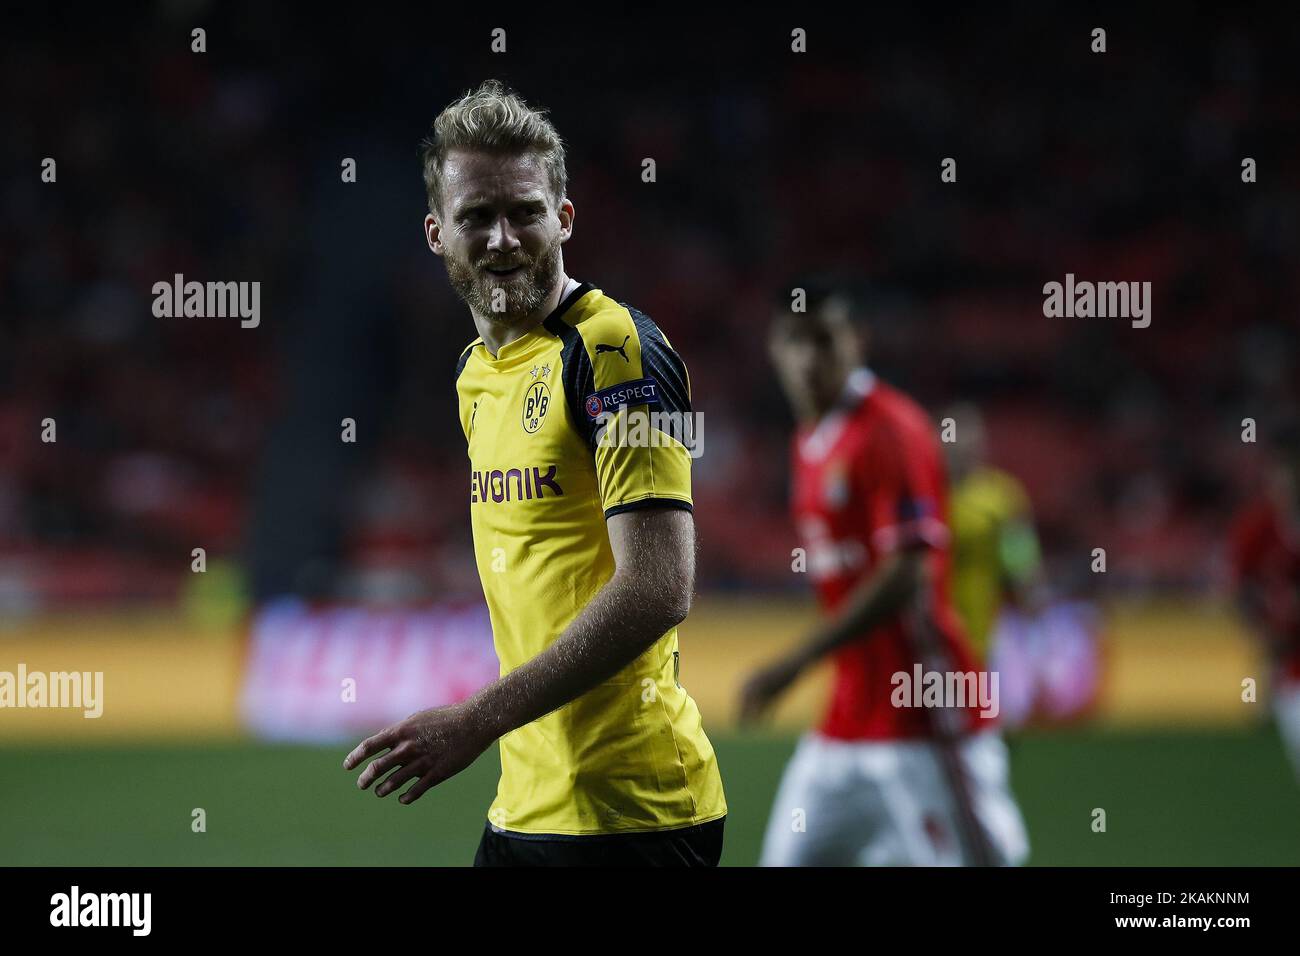 Dortmund's forward Andre Schurrle reacts during Champions League 2016/17 match between SL Benfica vs BVB Borussia Dortmund, in Lisbon, on February 14, 2017. (Photo by Carlos Palma/NurPhoto) *** Please Use Credit from Credit Field *** Stock Photo